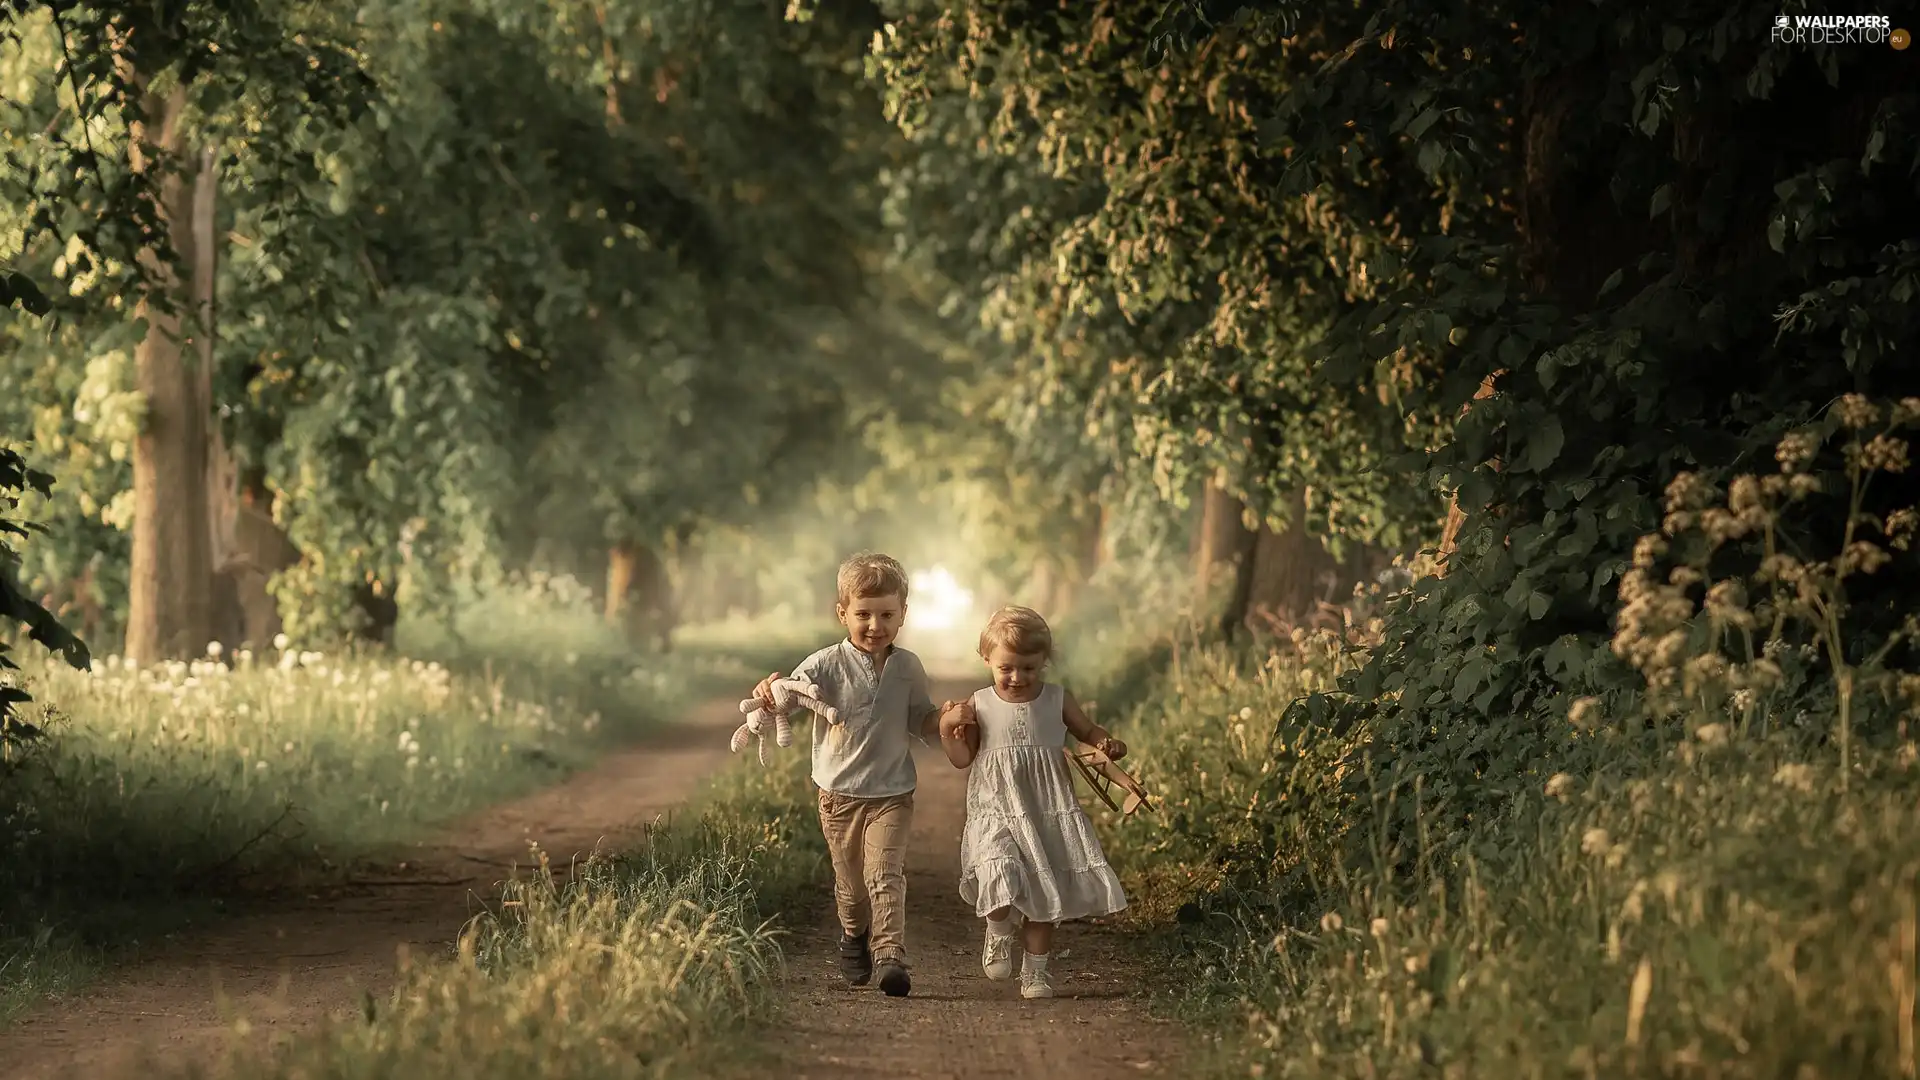 trees, boy, forest, girl, Kid, viewes, Way